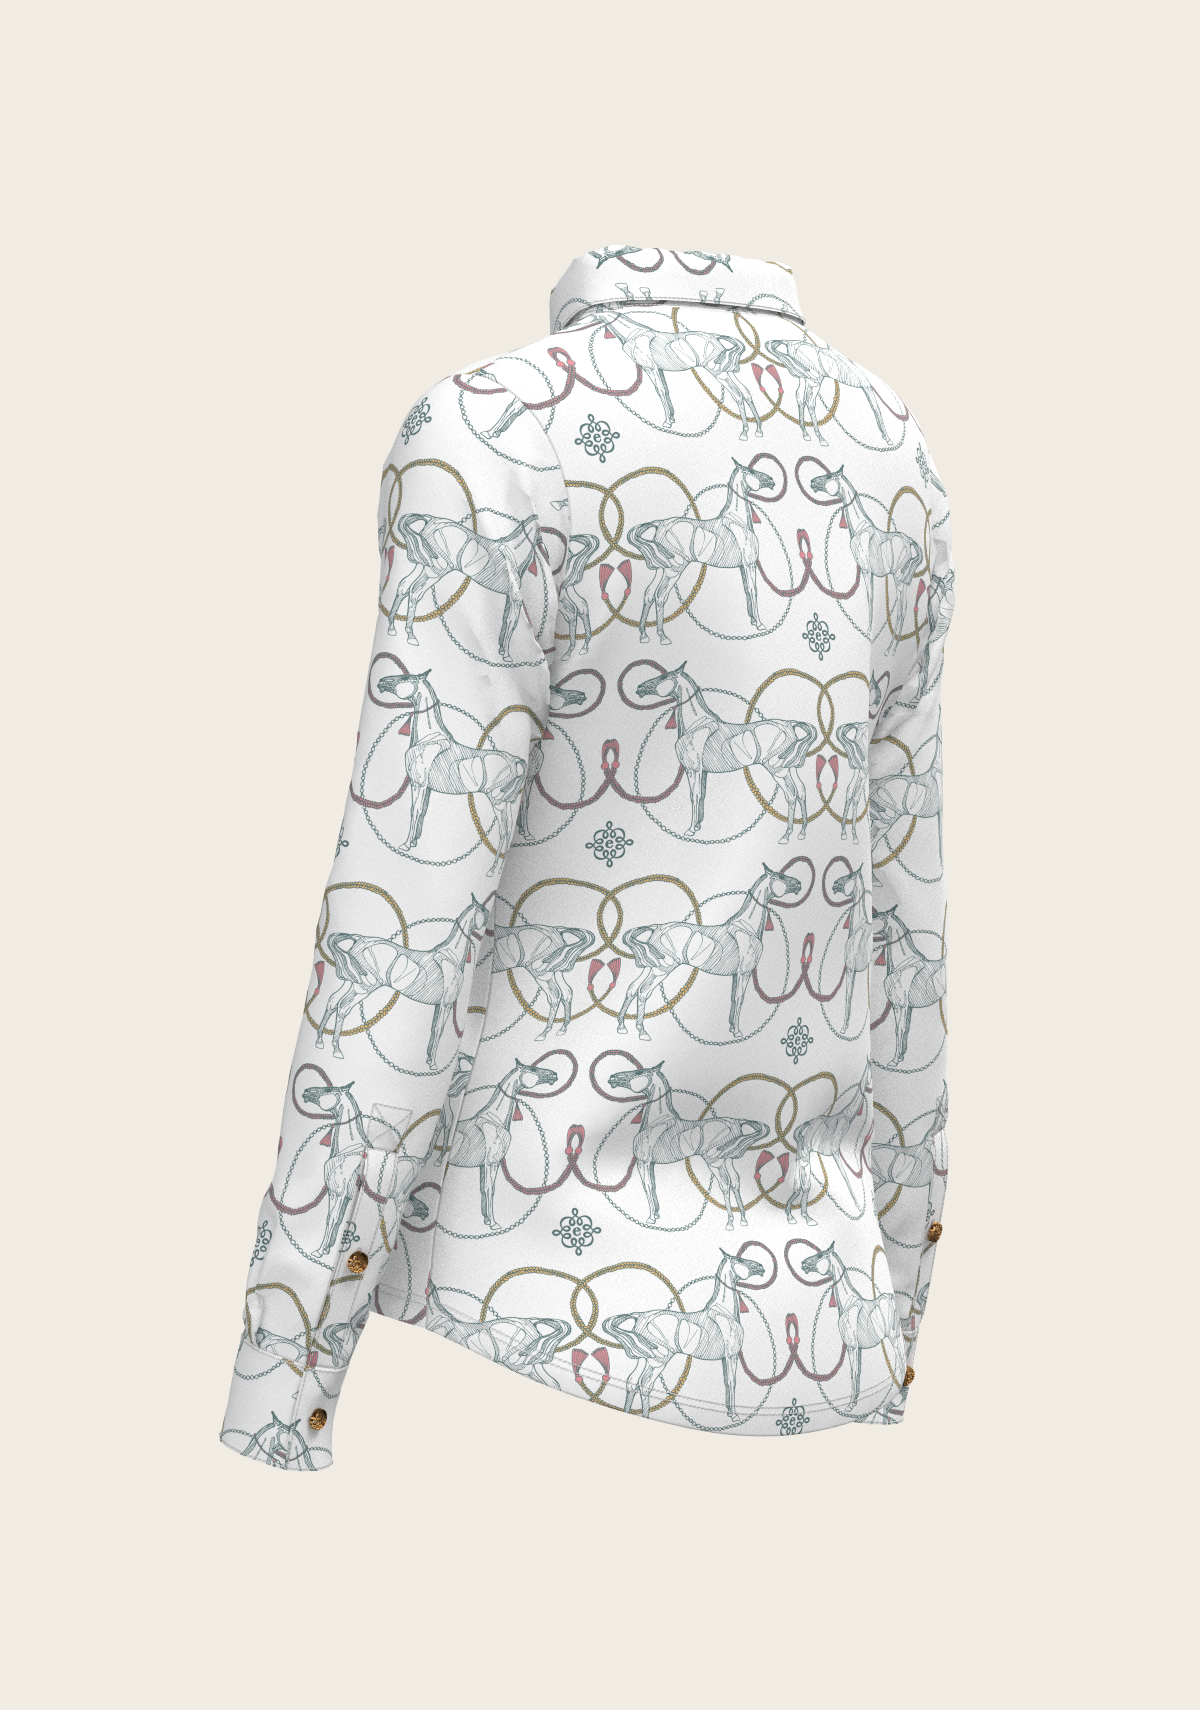 Teal Roped Horses on White Ladies Button Shirt